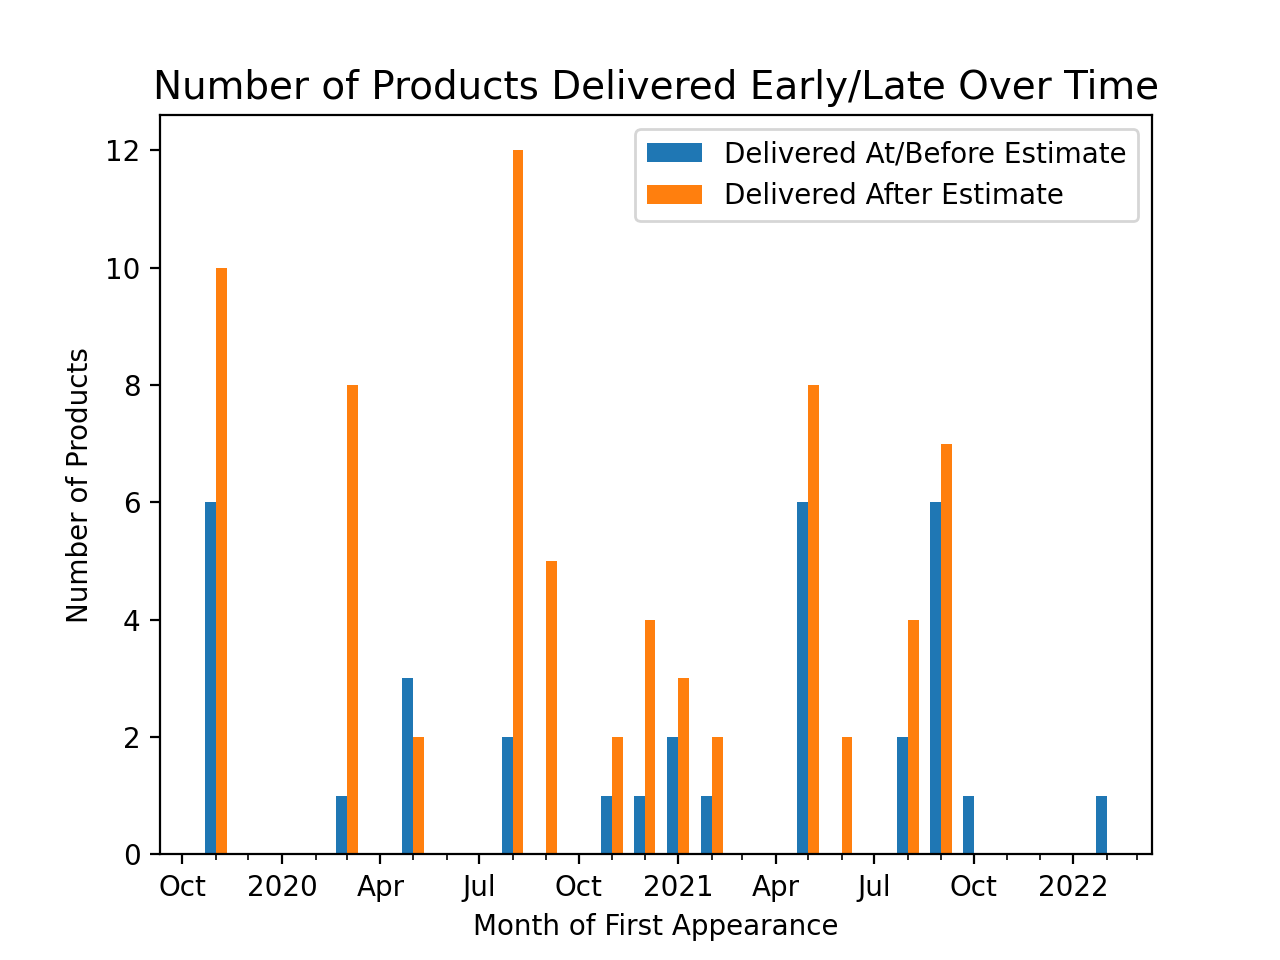 Timeline of Completed Products